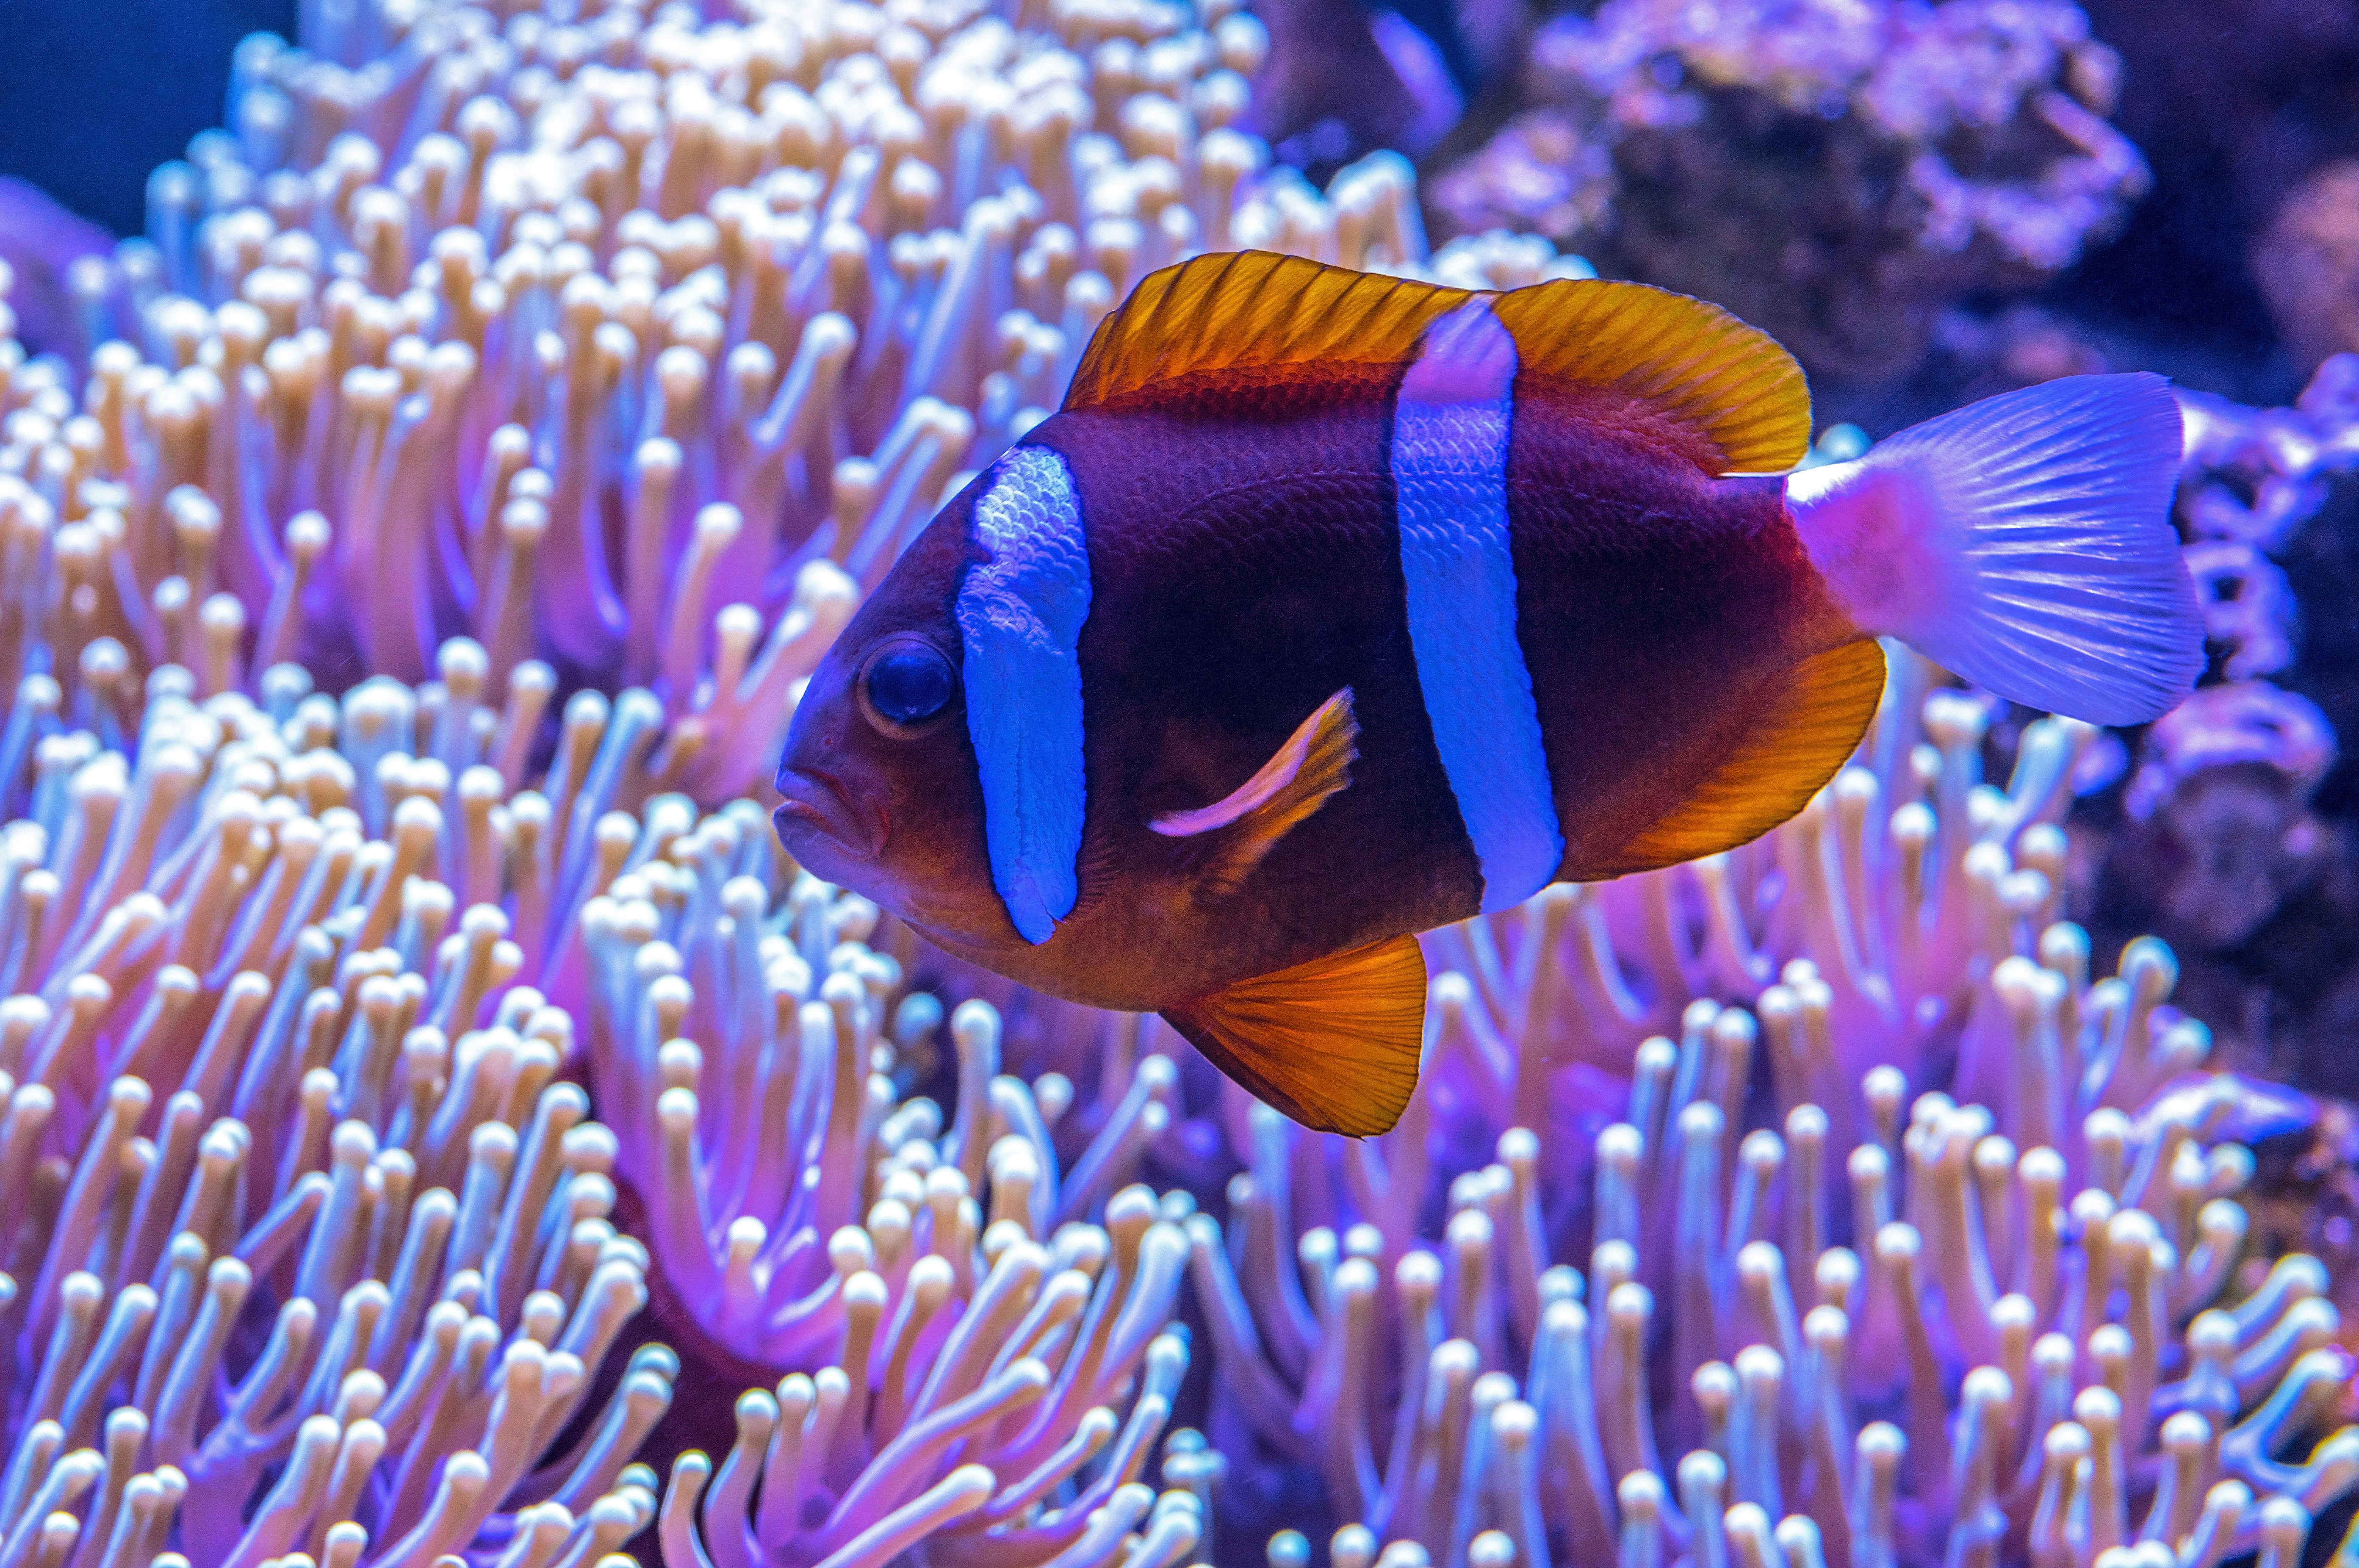 Anemone fish live in sea anemones, where the stinging tentacles of the anemone provide protection for the fish from predators, while the anemone fish is itself immune to the stings.